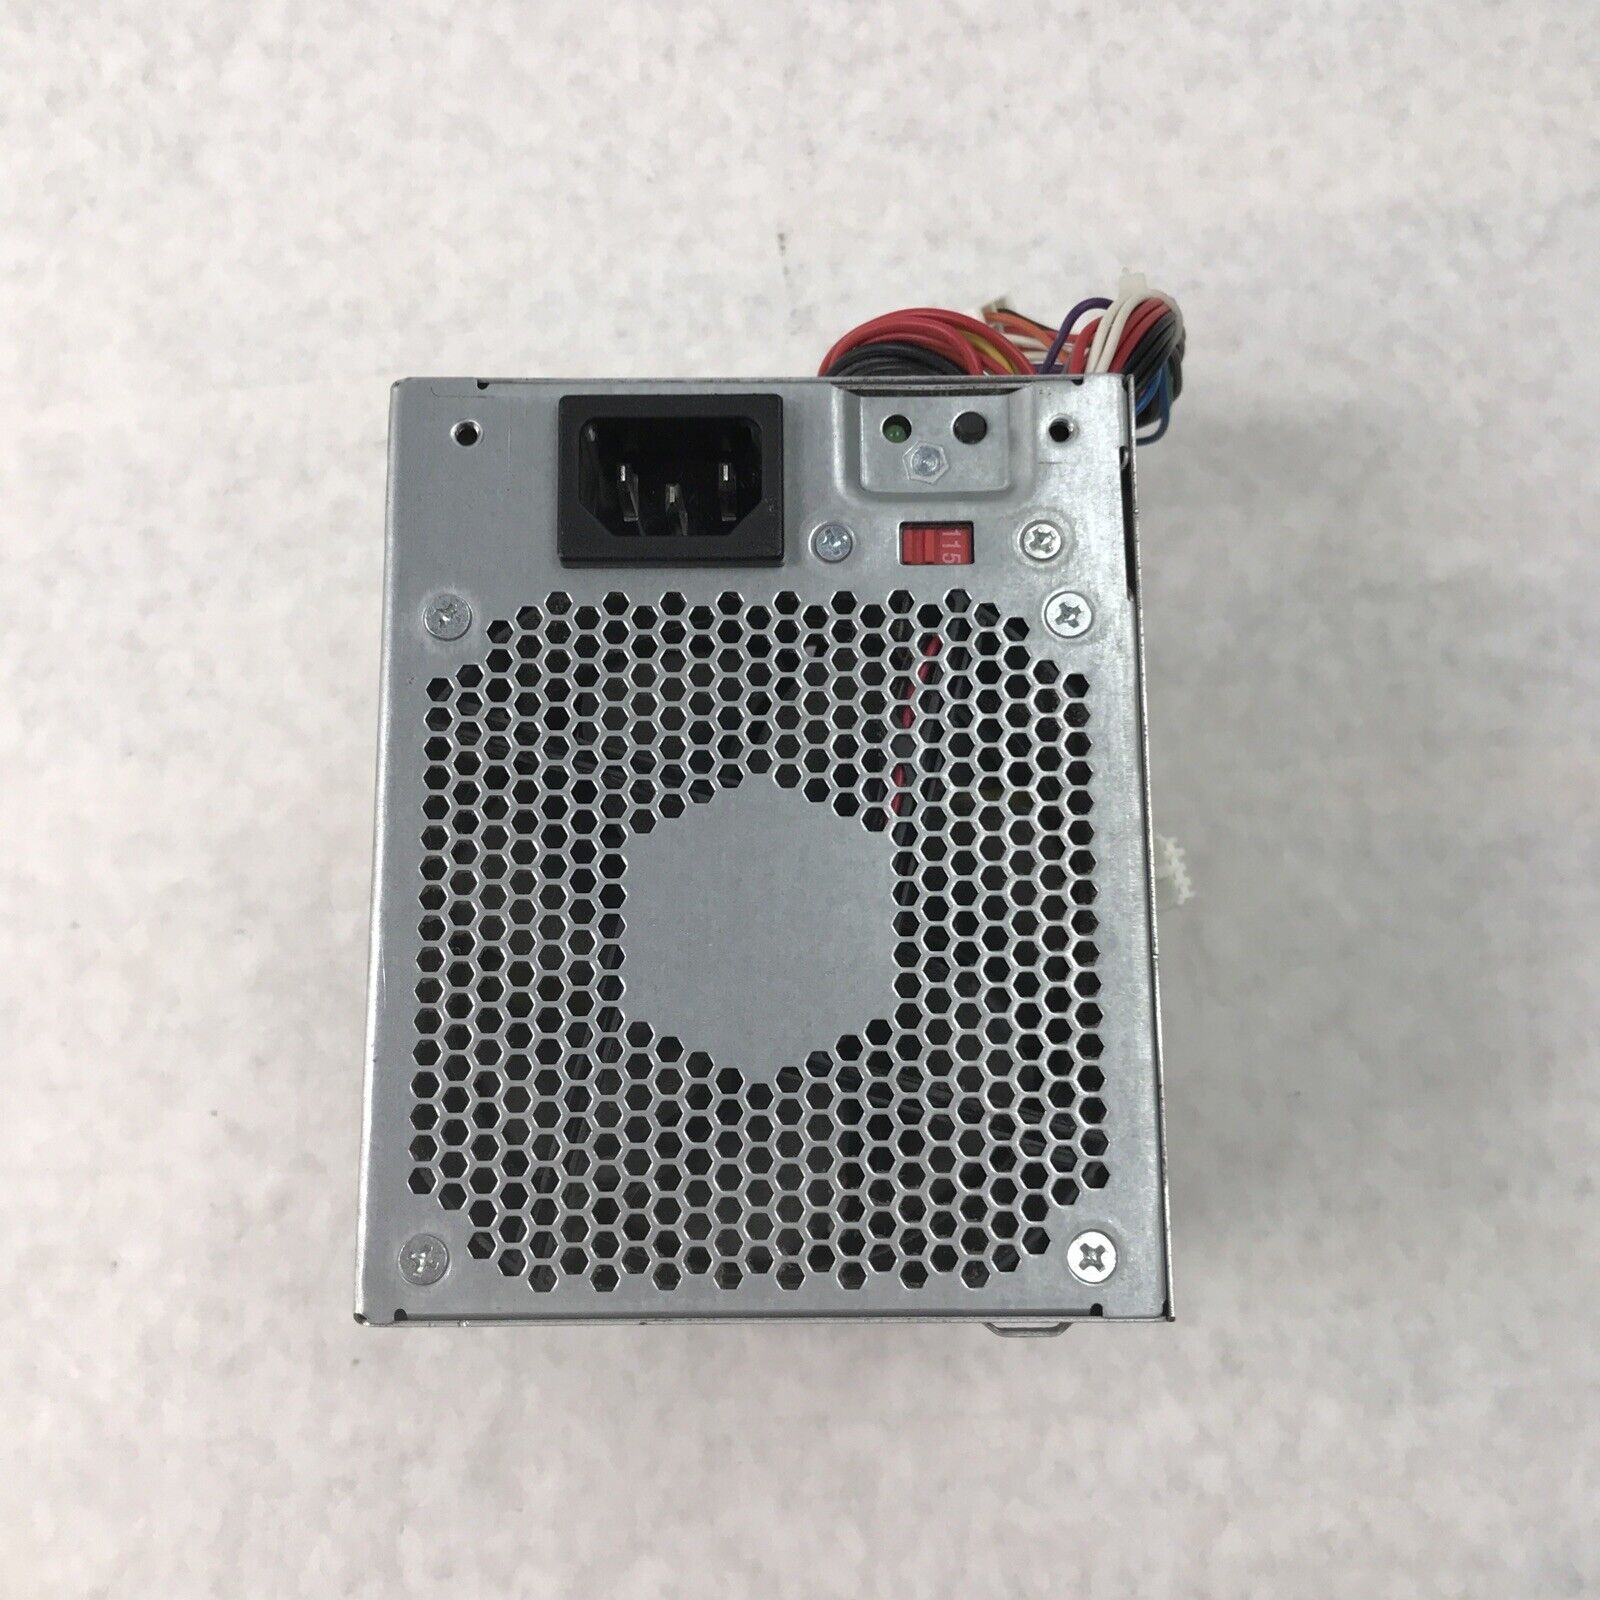 Dell H235PD-01 Power Supply M619F (Tested and Working)